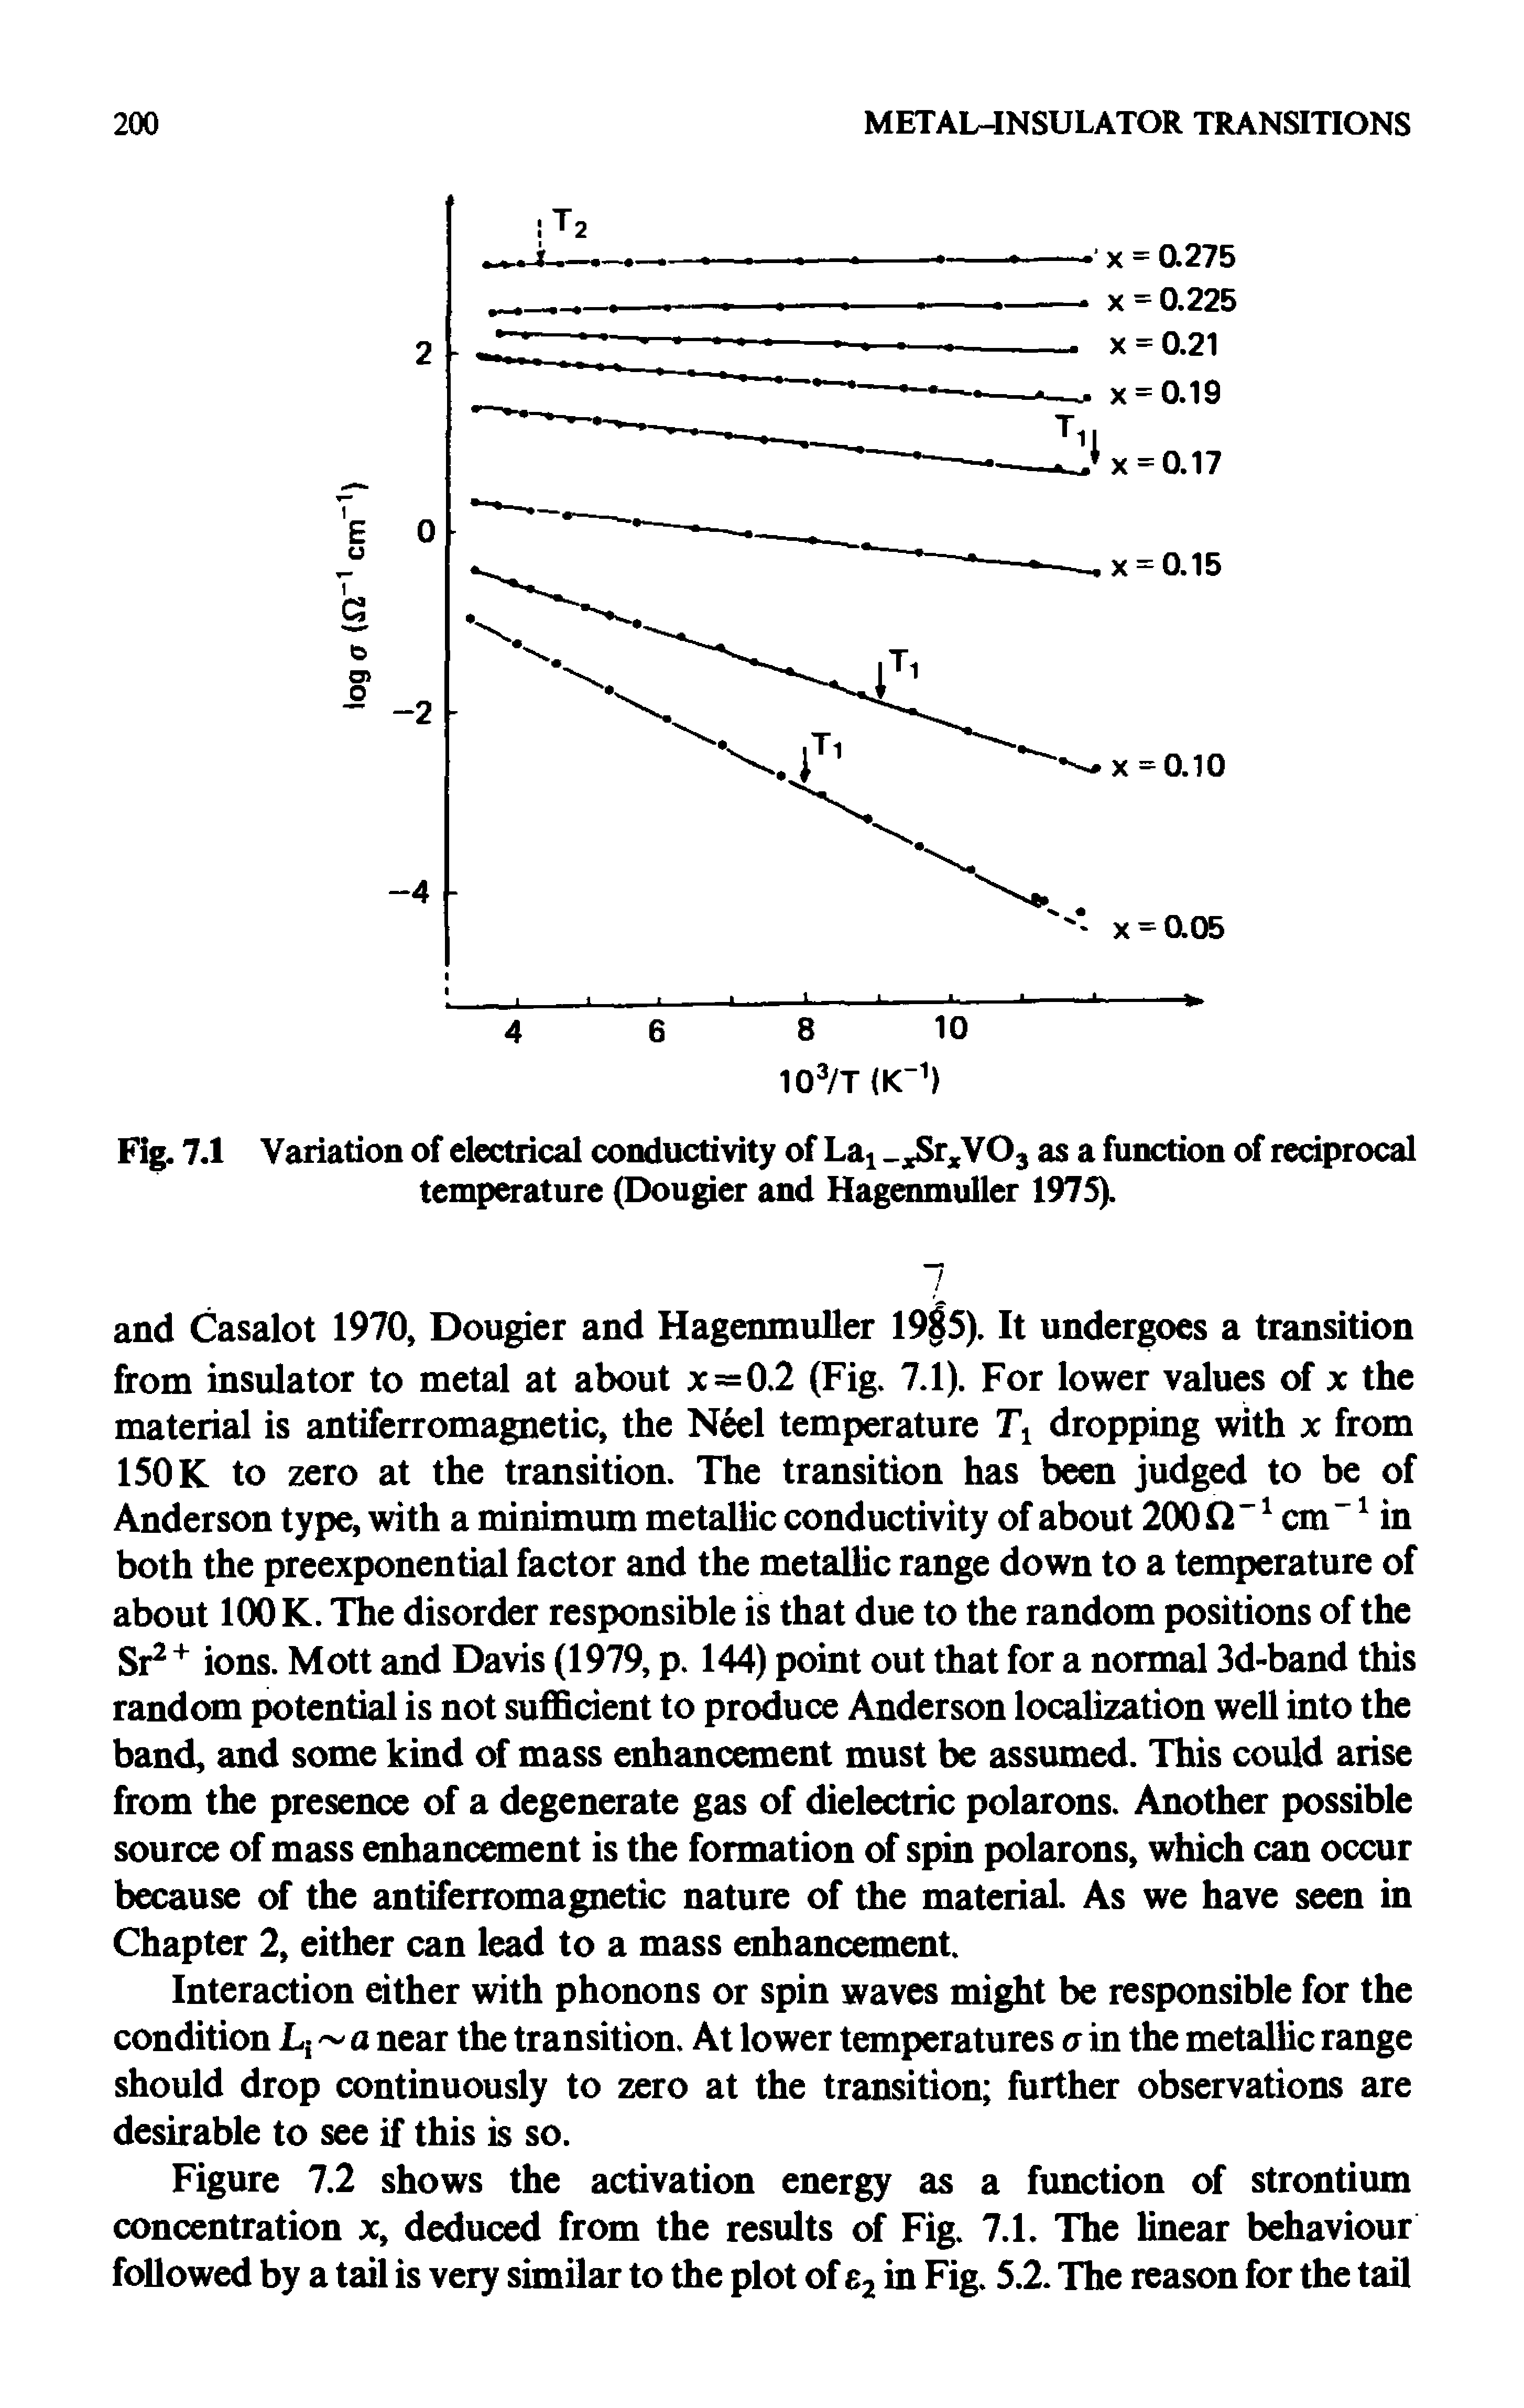 Figure 7.2 shows the activation energy as a function of strontium concentration x, deduced from the results of Fig. 7.1. The linear behaviour followed by a tail is very similar to the plot of e2 in Fig. 5.2. The reason for the tail...